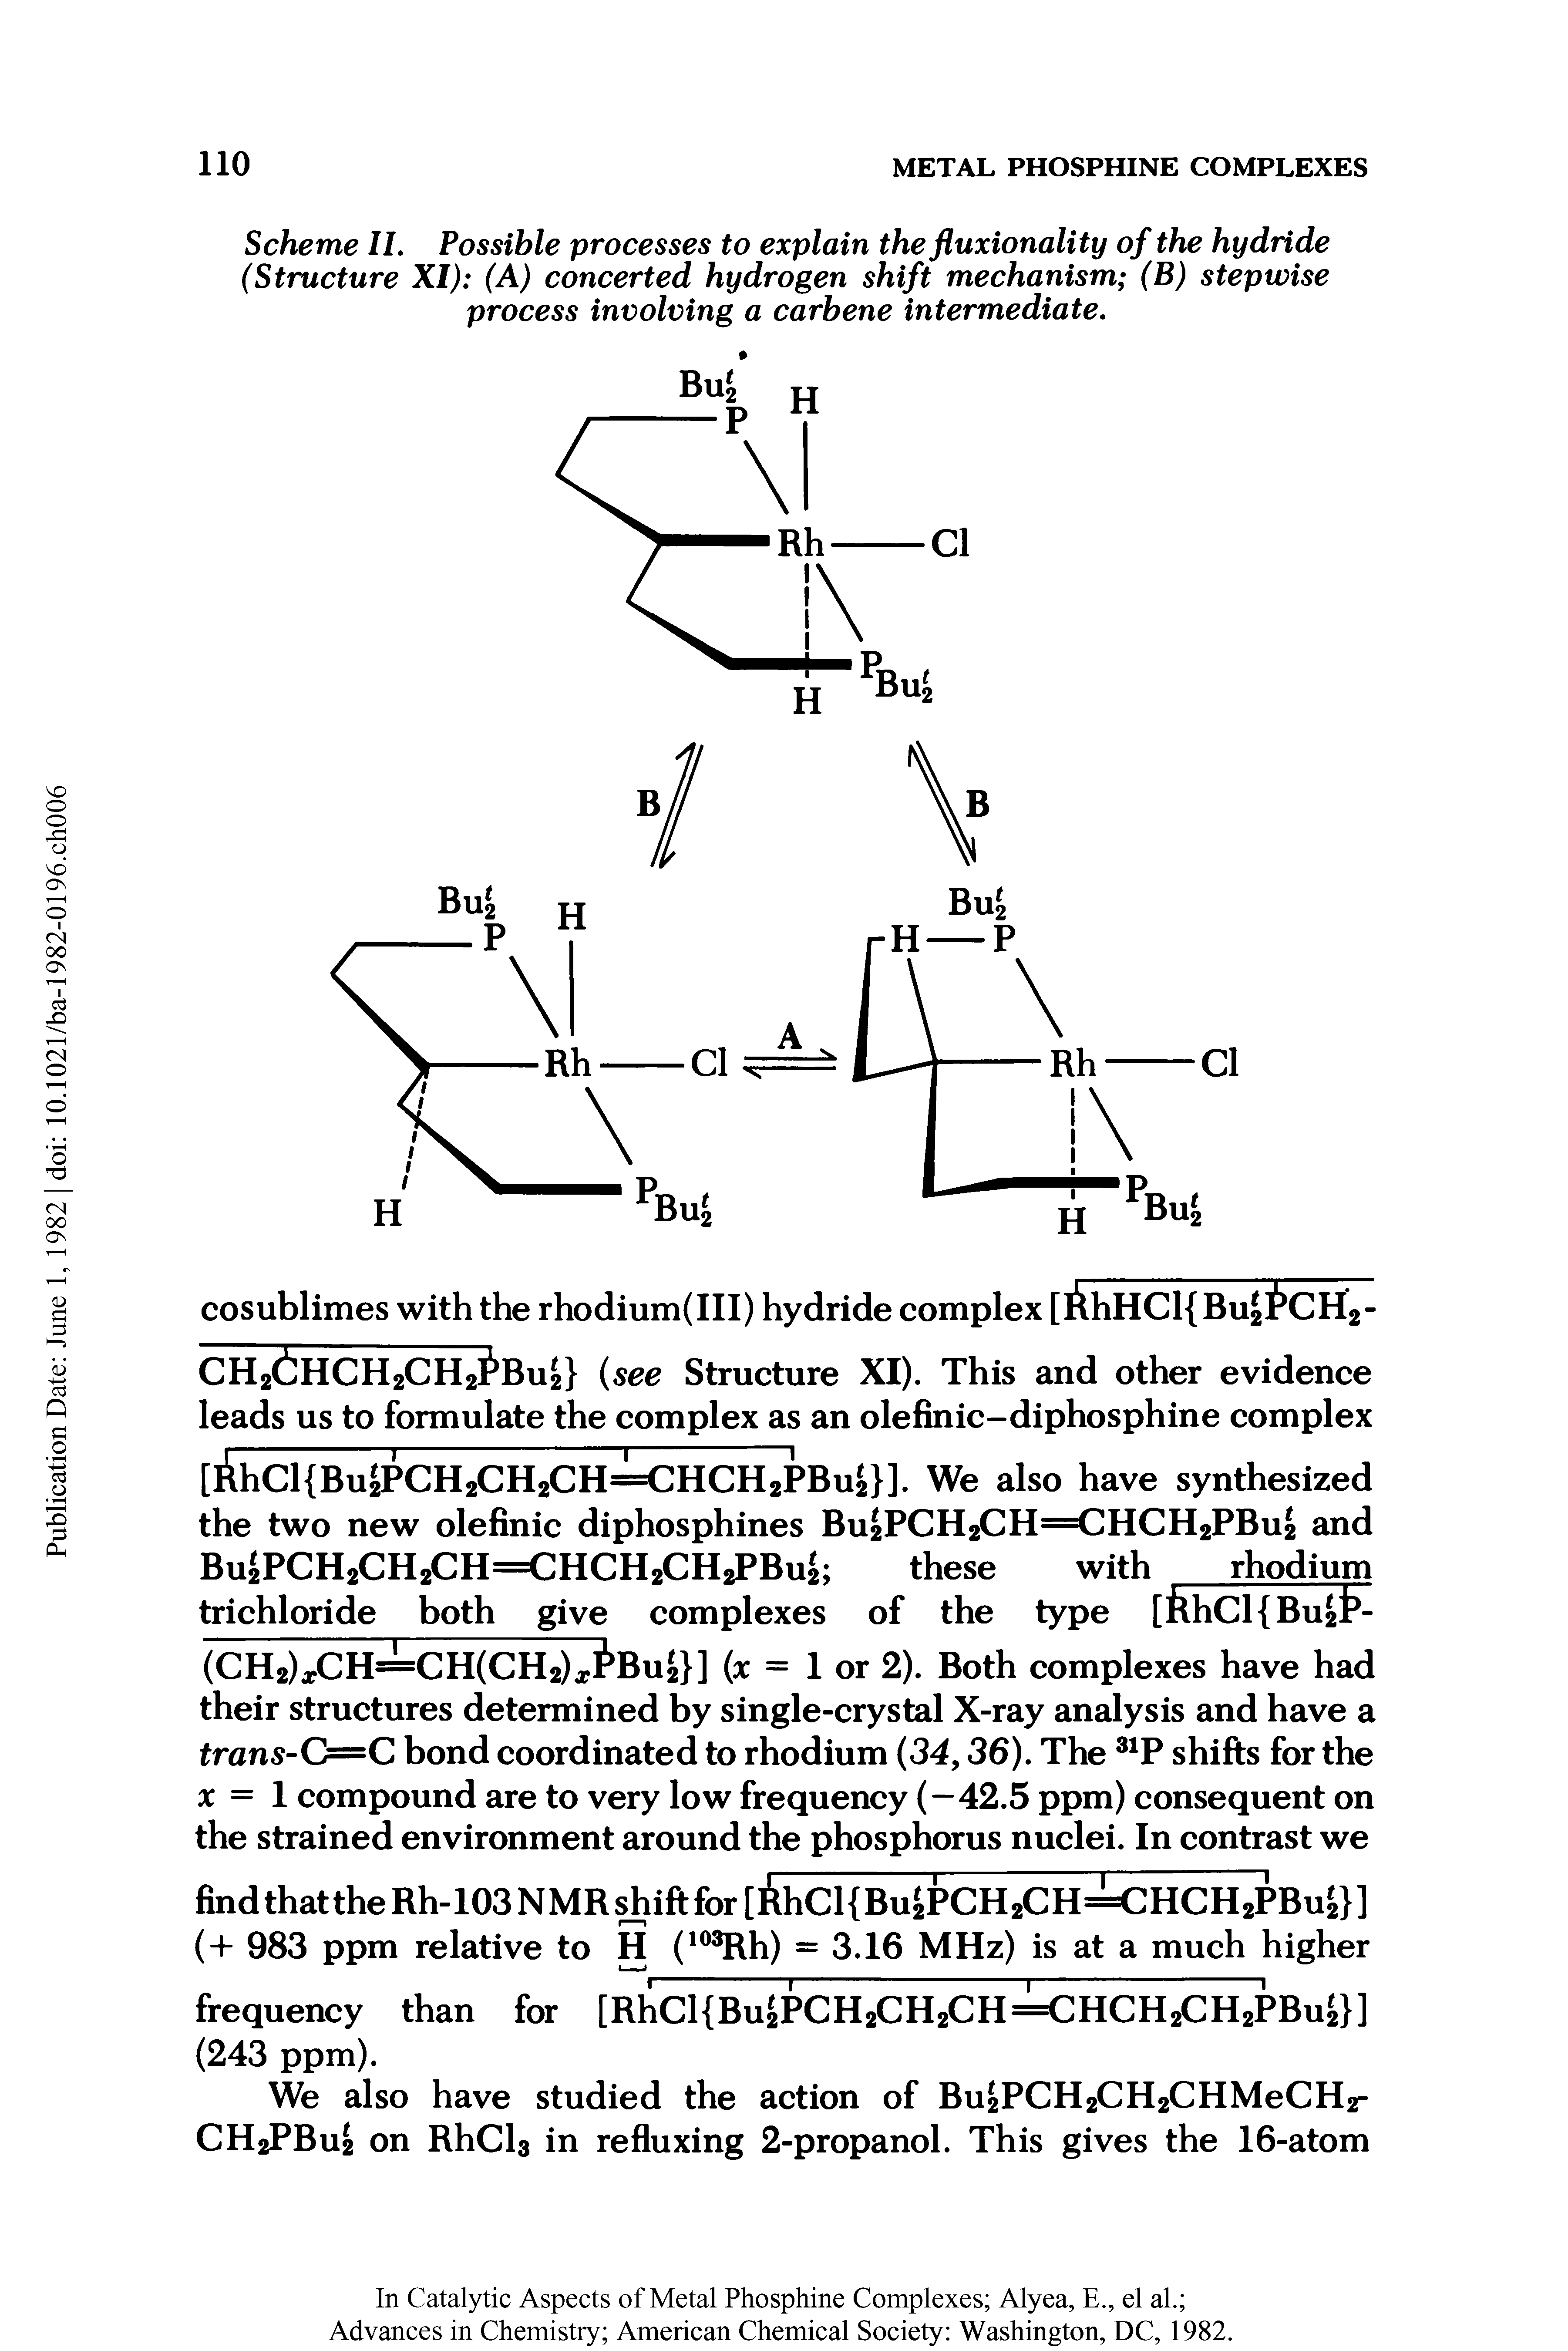 Scheme II. Possible processes to explain the fluxionality of the hydride (Structure XI) (A) concerted hydrogen shift mechanism (B) stepwise process involving a carbene intermediate.